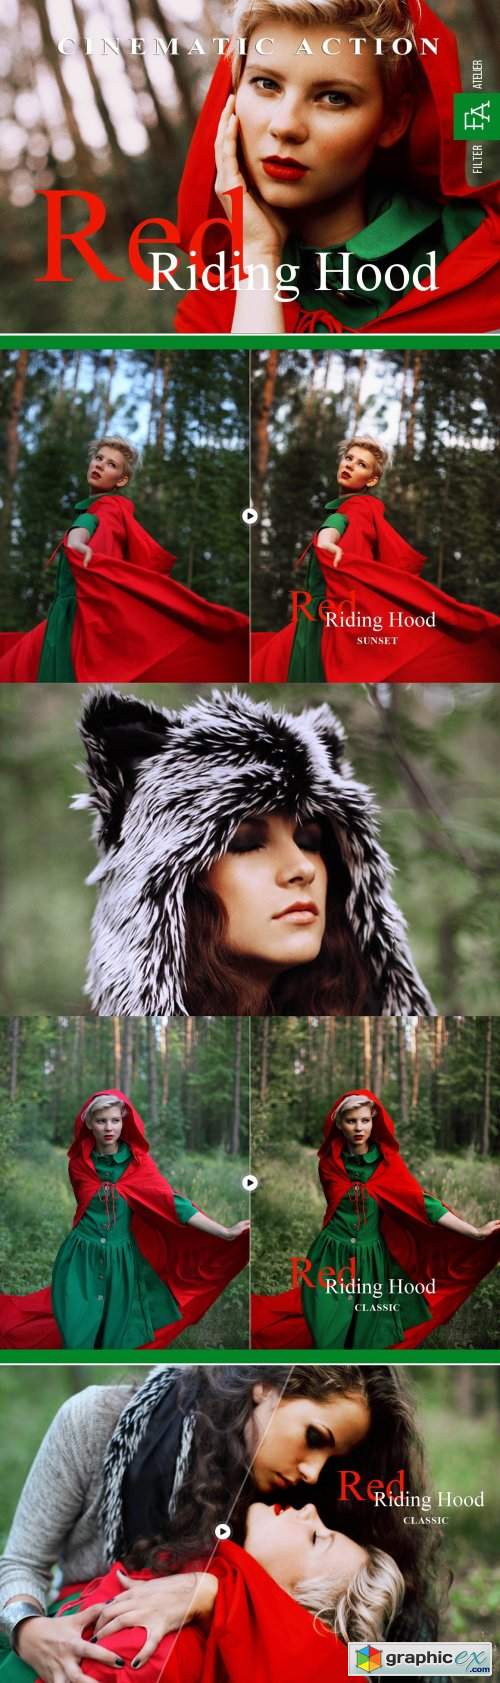 Red Riding Hood - Cinematic Action 